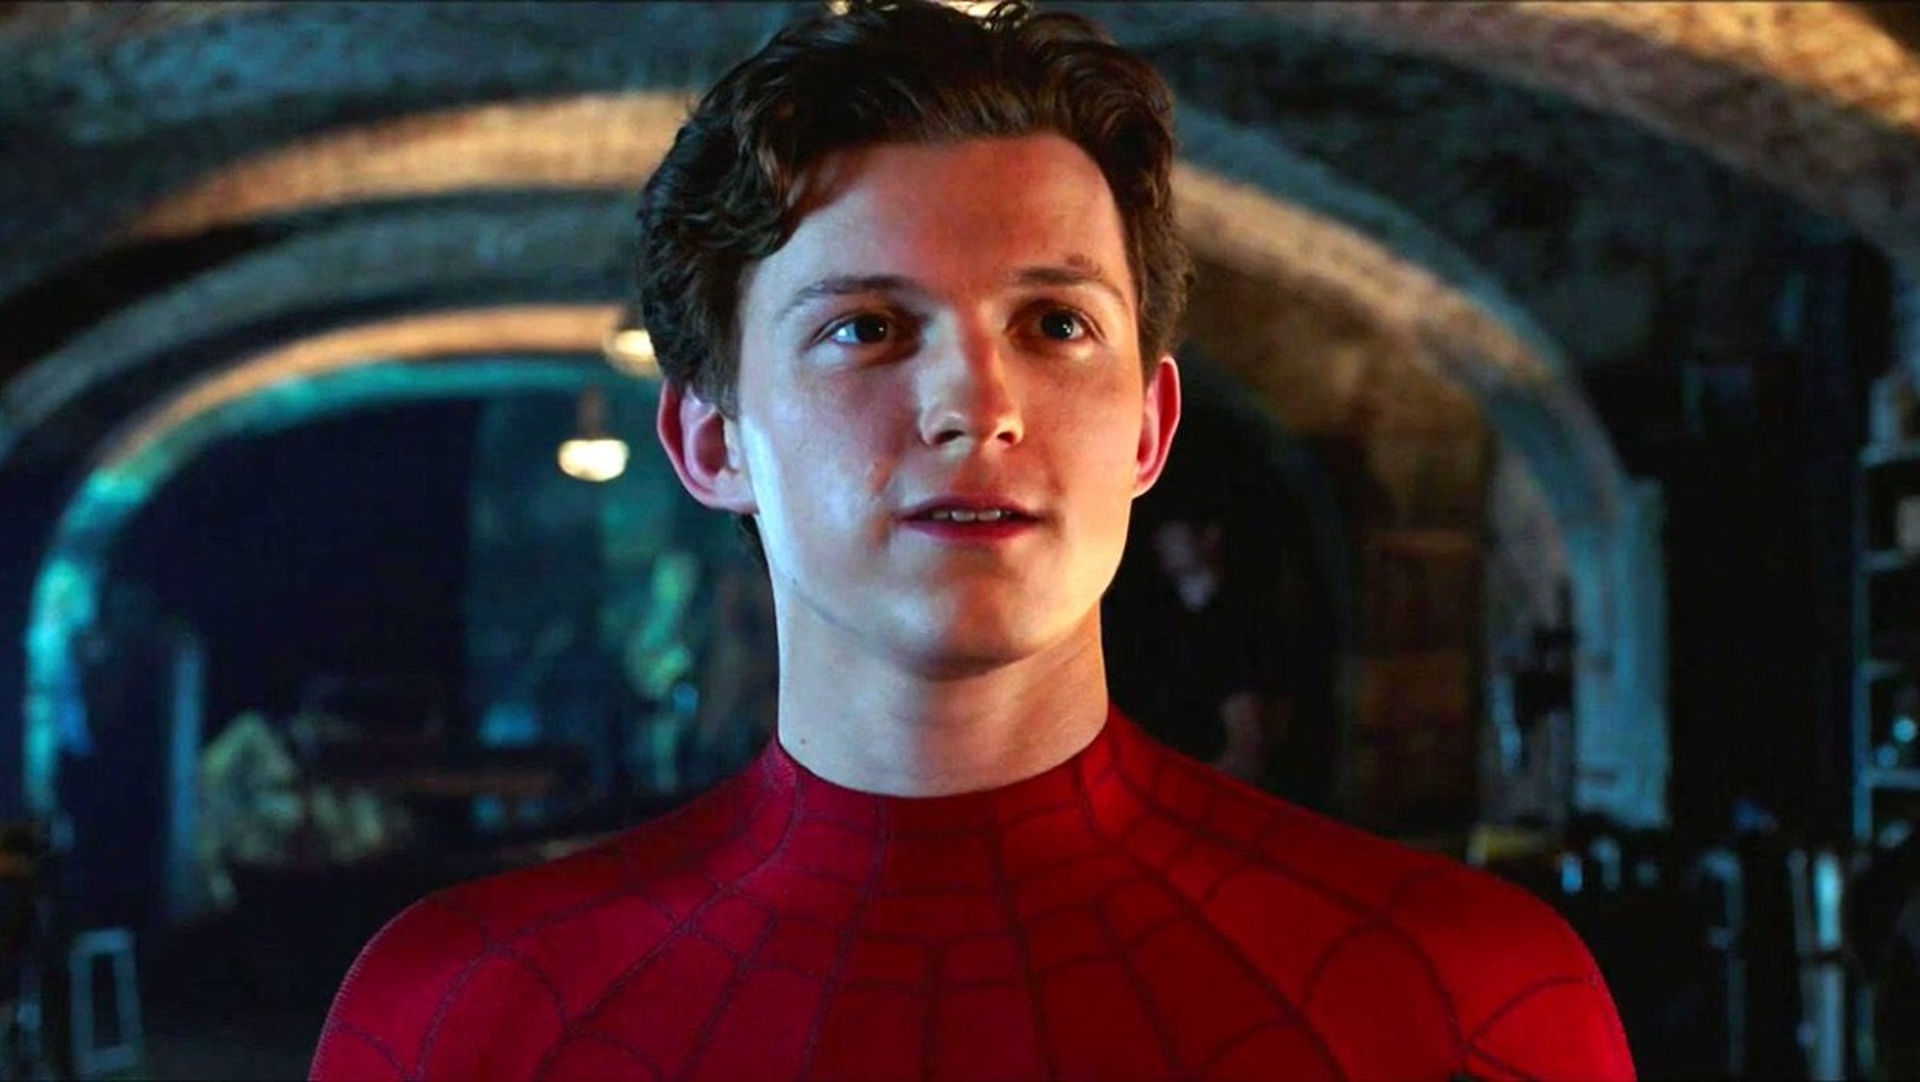 The Spider-Man 4 film from Sony Pictures and Marvel Studios will reportedly see Tom Holland Spider Man contract renewed, allowing him to play Peter Parker...